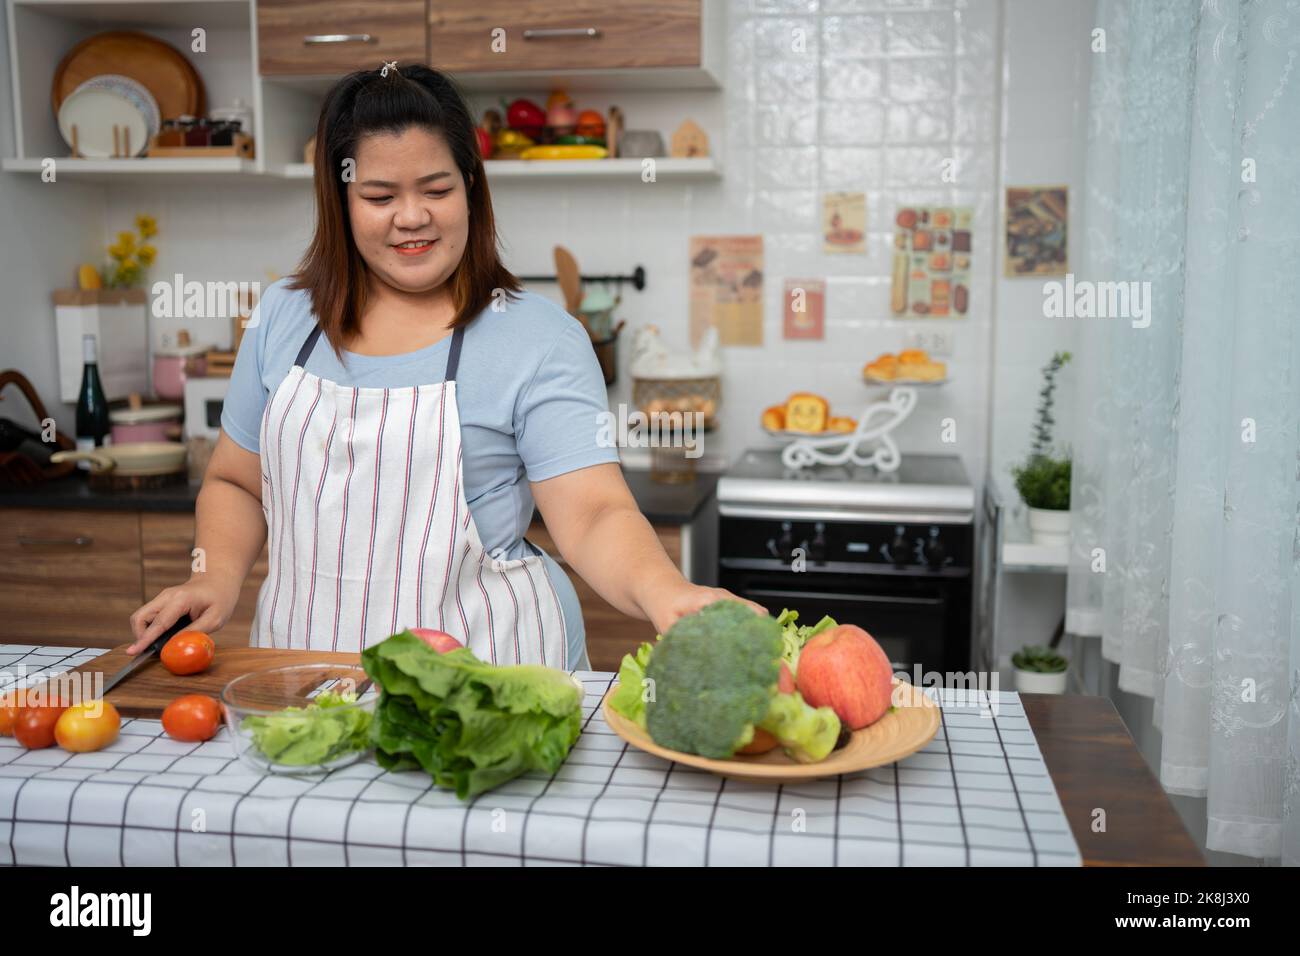 Asian Pregnant learn how to cook healthy meals from the Internet in kitchen, Fat women prepare a vegetable salad for diet food and lose weight. Concep Stock Photo